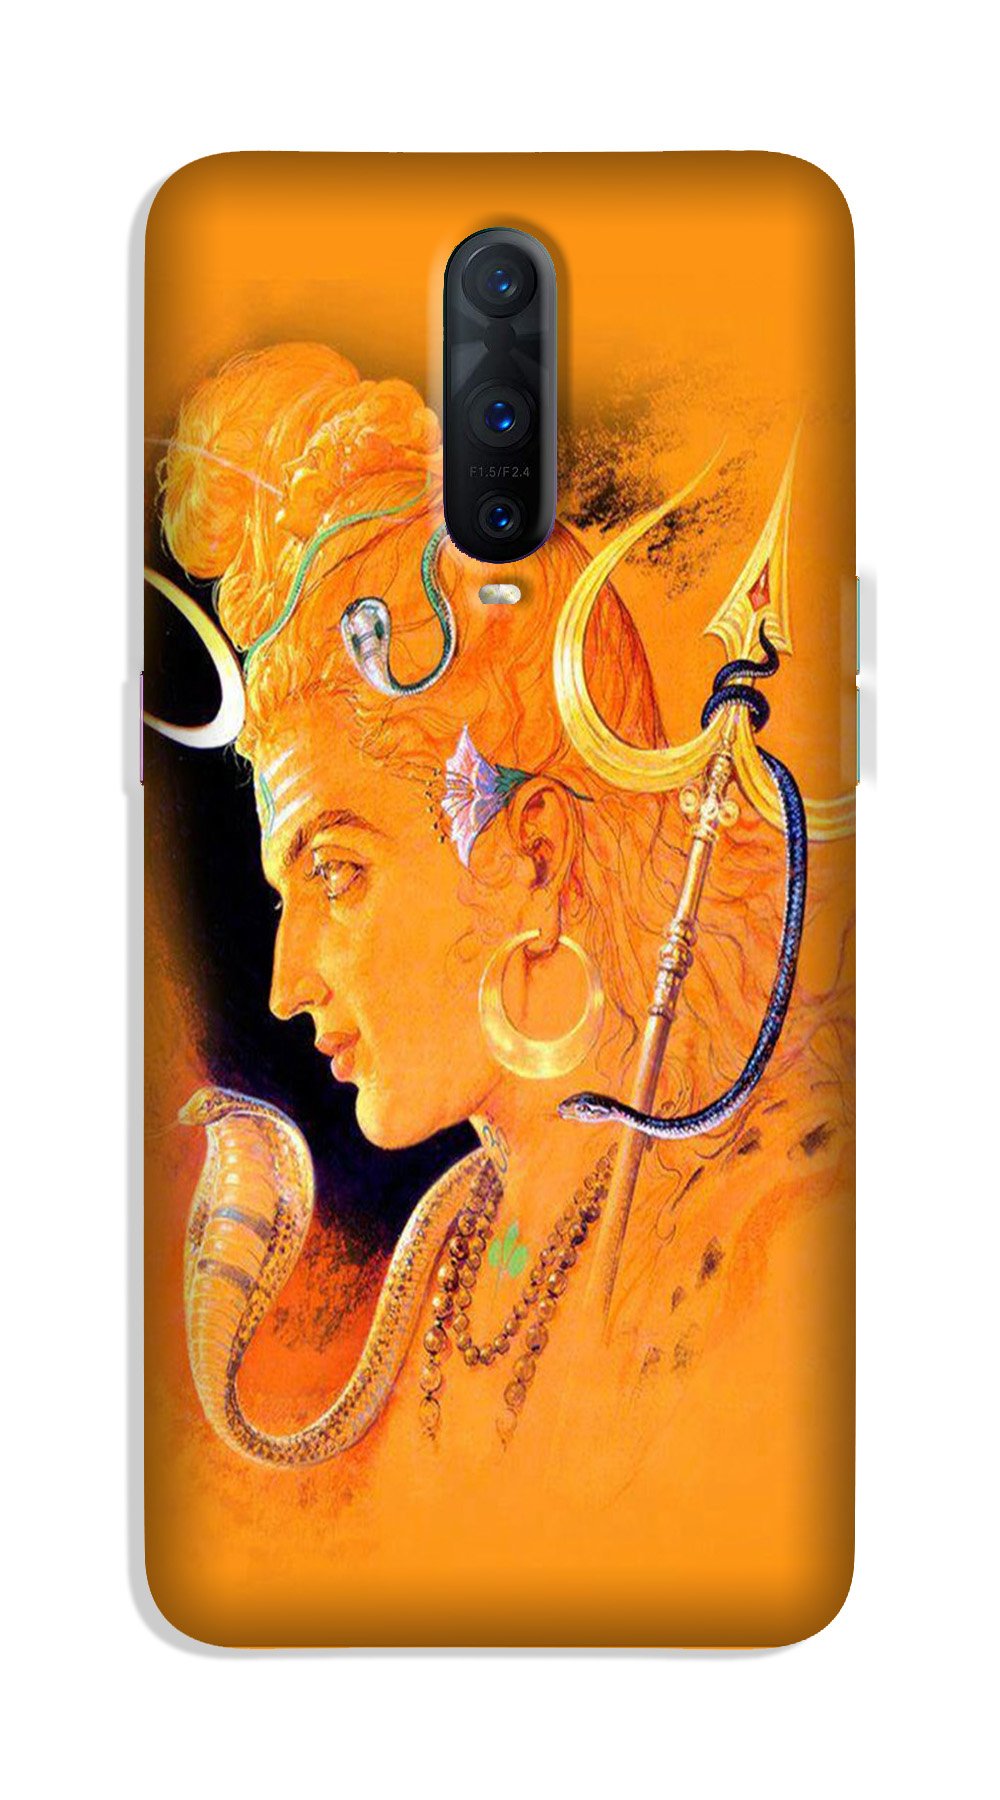 Lord Shiva Case for OnePlus 7 Pro (Design No. 293)